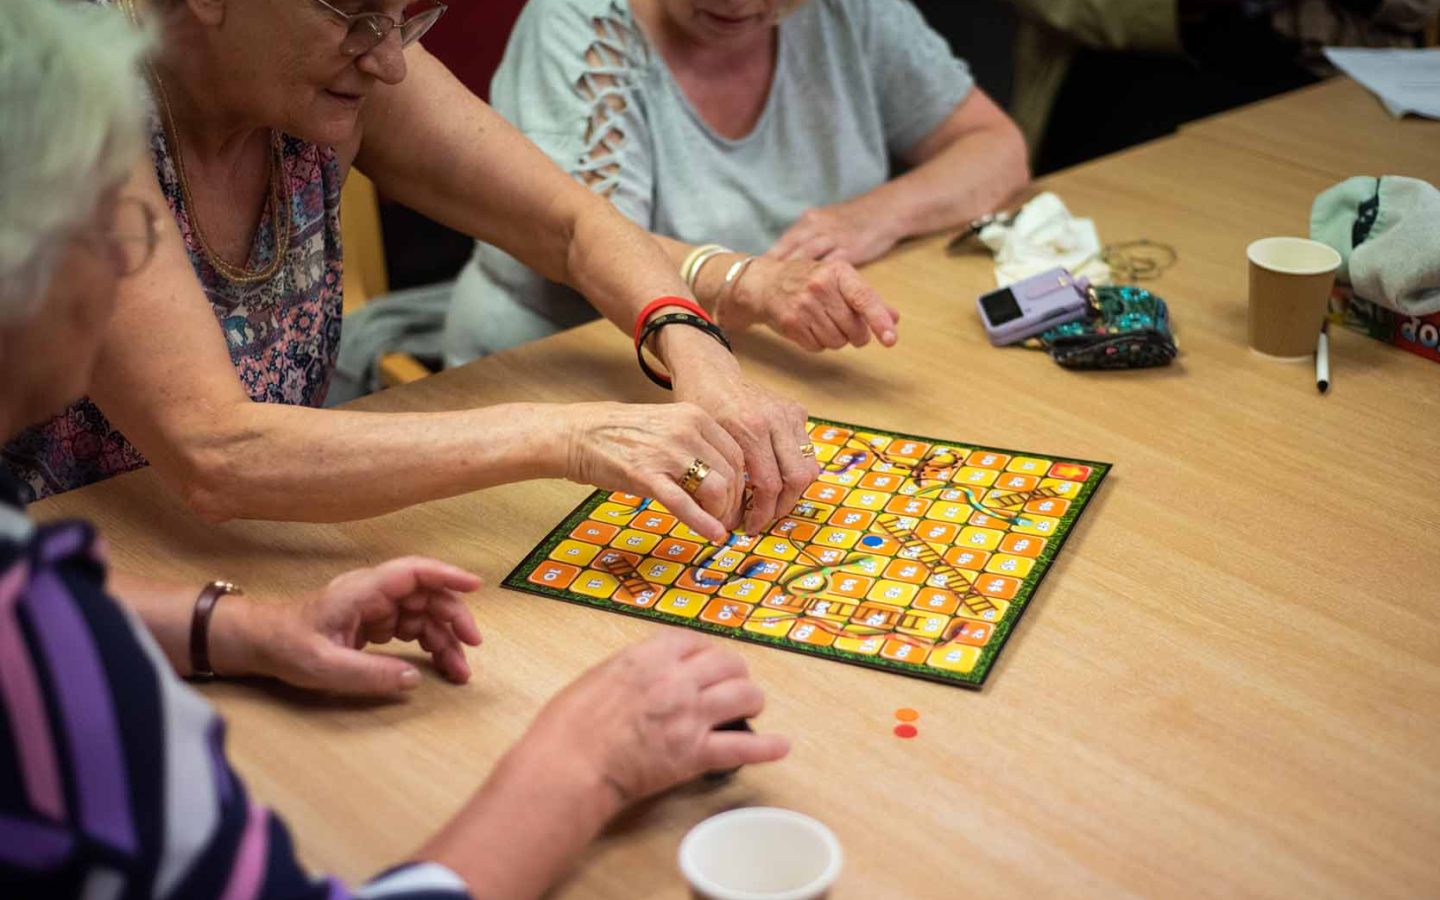 three People playing board game in care environment.